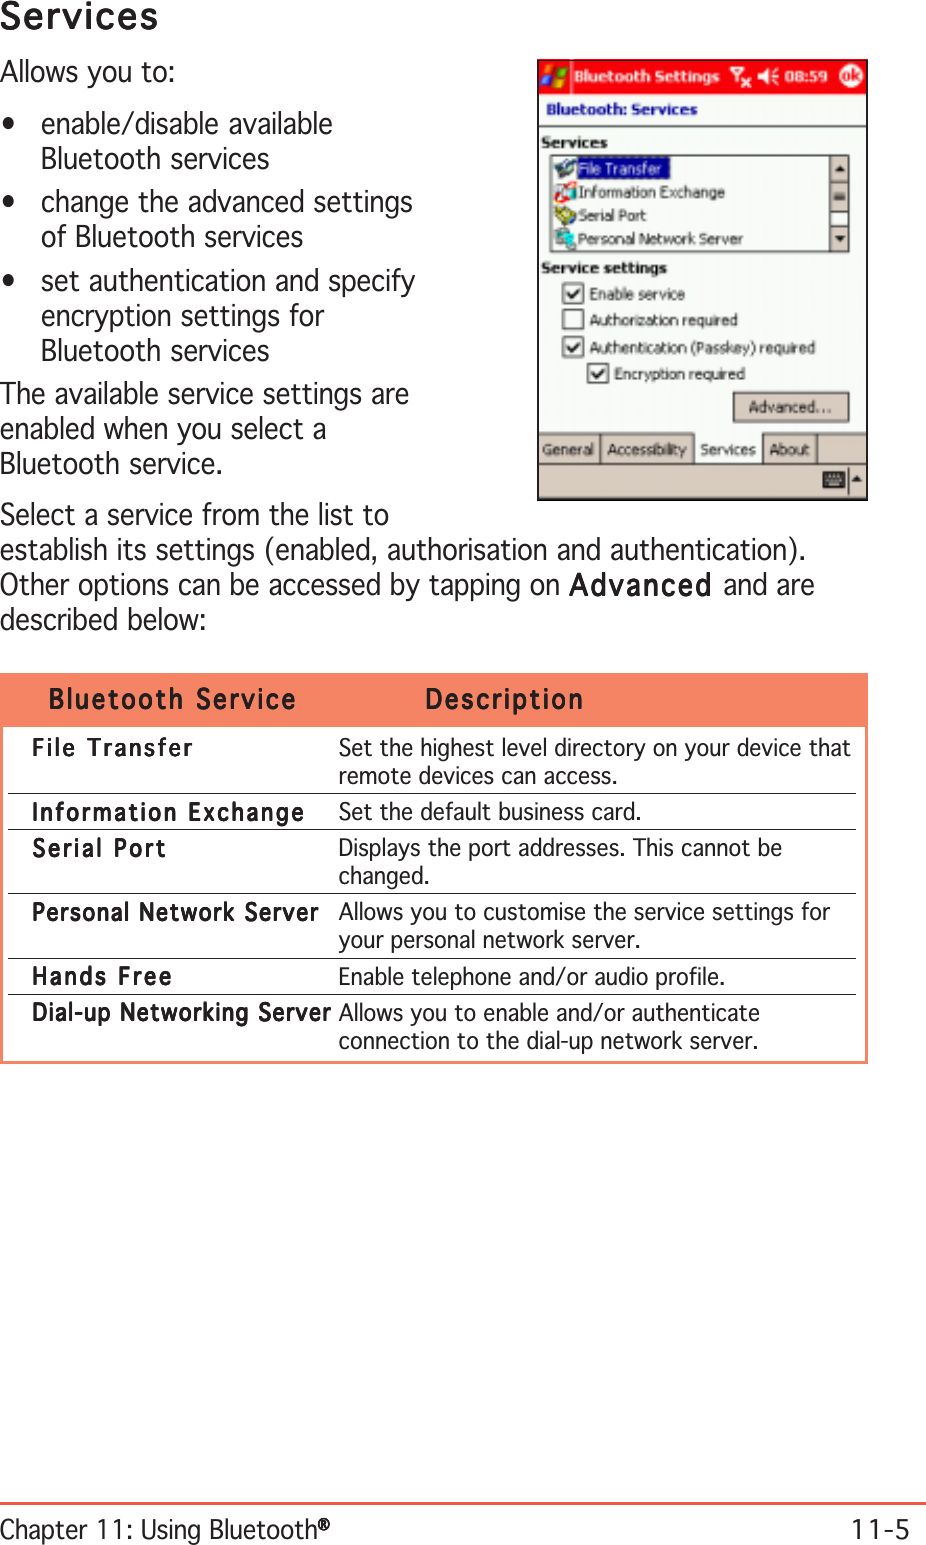 Chapter 11: Using Bluetooth®®®®®11-5ServicesServicesServicesServicesServicesAllows you to:• enable/disable availableBluetooth services• change the advanced settingsof Bluetooth services• set authentication and specifyencryption settings forBluetooth servicesThe available service settings areenabled when you select aBluetooth service.Select a service from the list toestablish its settings (enabled, authorisation and authentication).Other options can be accessed by tapping on AdvancedAdvancedAdvancedAdvancedAdvanced and aredescribed below:Bluetooth ServiceBluetooth ServiceBluetooth ServiceBluetooth ServiceBluetooth Service DescriptionDescriptionDescriptionDescriptionDescriptionFile TransferFile TransferFile TransferFile TransferF i l e  Tr a n s f e r Set the highest level directory on your device thatremote devices can access.Information ExchangeInformation ExchangeInformation ExchangeInformation ExchangeI nf o r m ati o n   Ex c h a ng e Set the default business card.Serial PortSerial PortSerial PortSerial PortS e r i a l   P o r t Displays the port addresses. This cannot bechanged.Personal Network ServerPersonal Network ServerPersonal Network ServerPersonal Network ServerPersonal Network Server Allows you to customise the service settings foryour personal network server.Hands FreeHands FreeHands FreeHands FreeH a n d s   F r e e Enable telephone and/or audio profile.Dial-up Networking ServerDial-up Networking ServerDial-up Networking ServerDial-up Networking ServerDial-up Networking Server Allows you to enable and/or authenticateconnection to the dial-up network server.